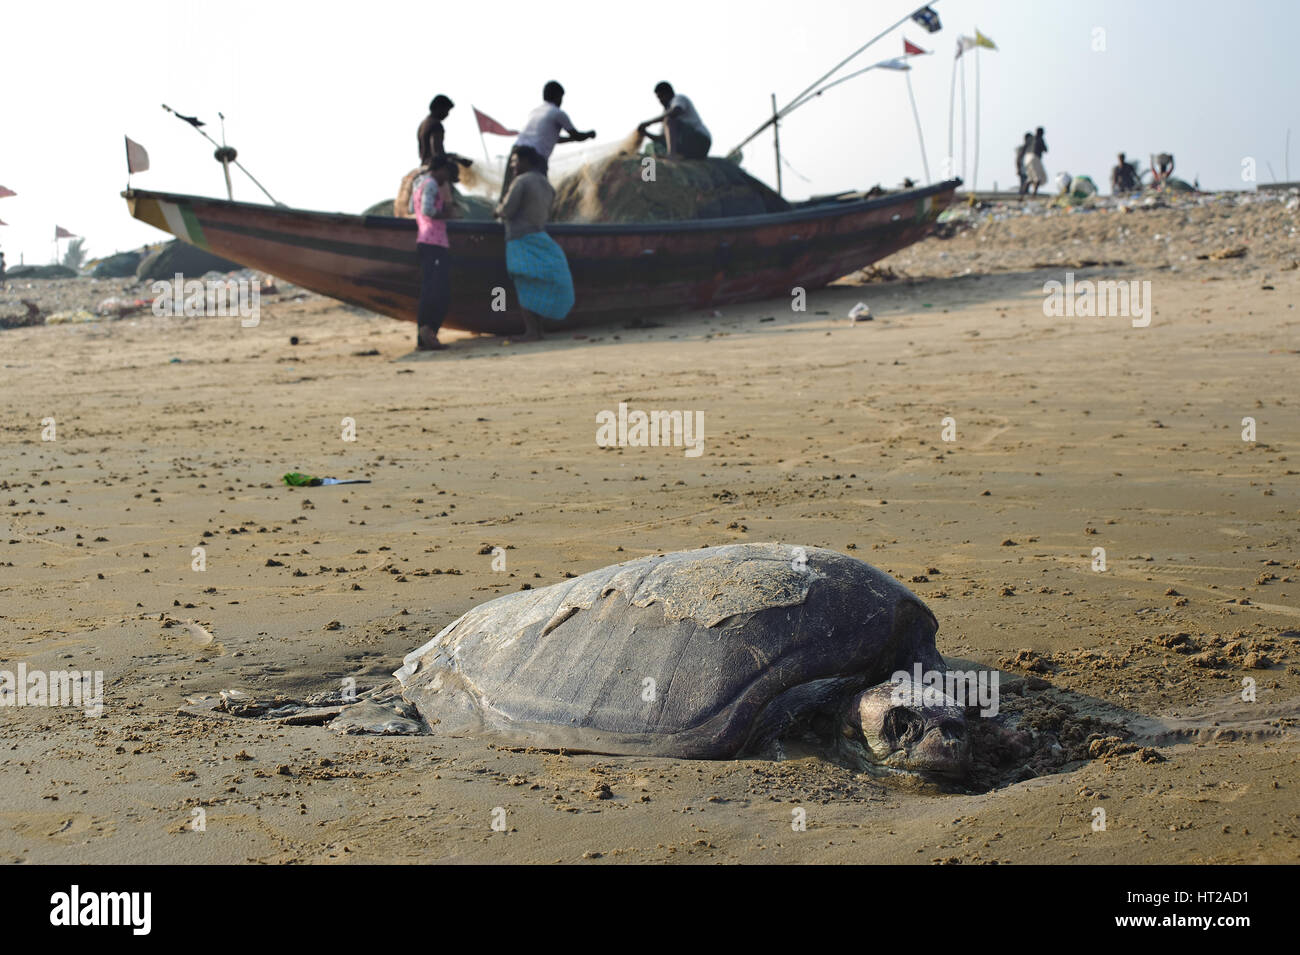 Carcass of a olive ridley turtle on a beach ( India) In the background, fishermen are visible. Stock Photo